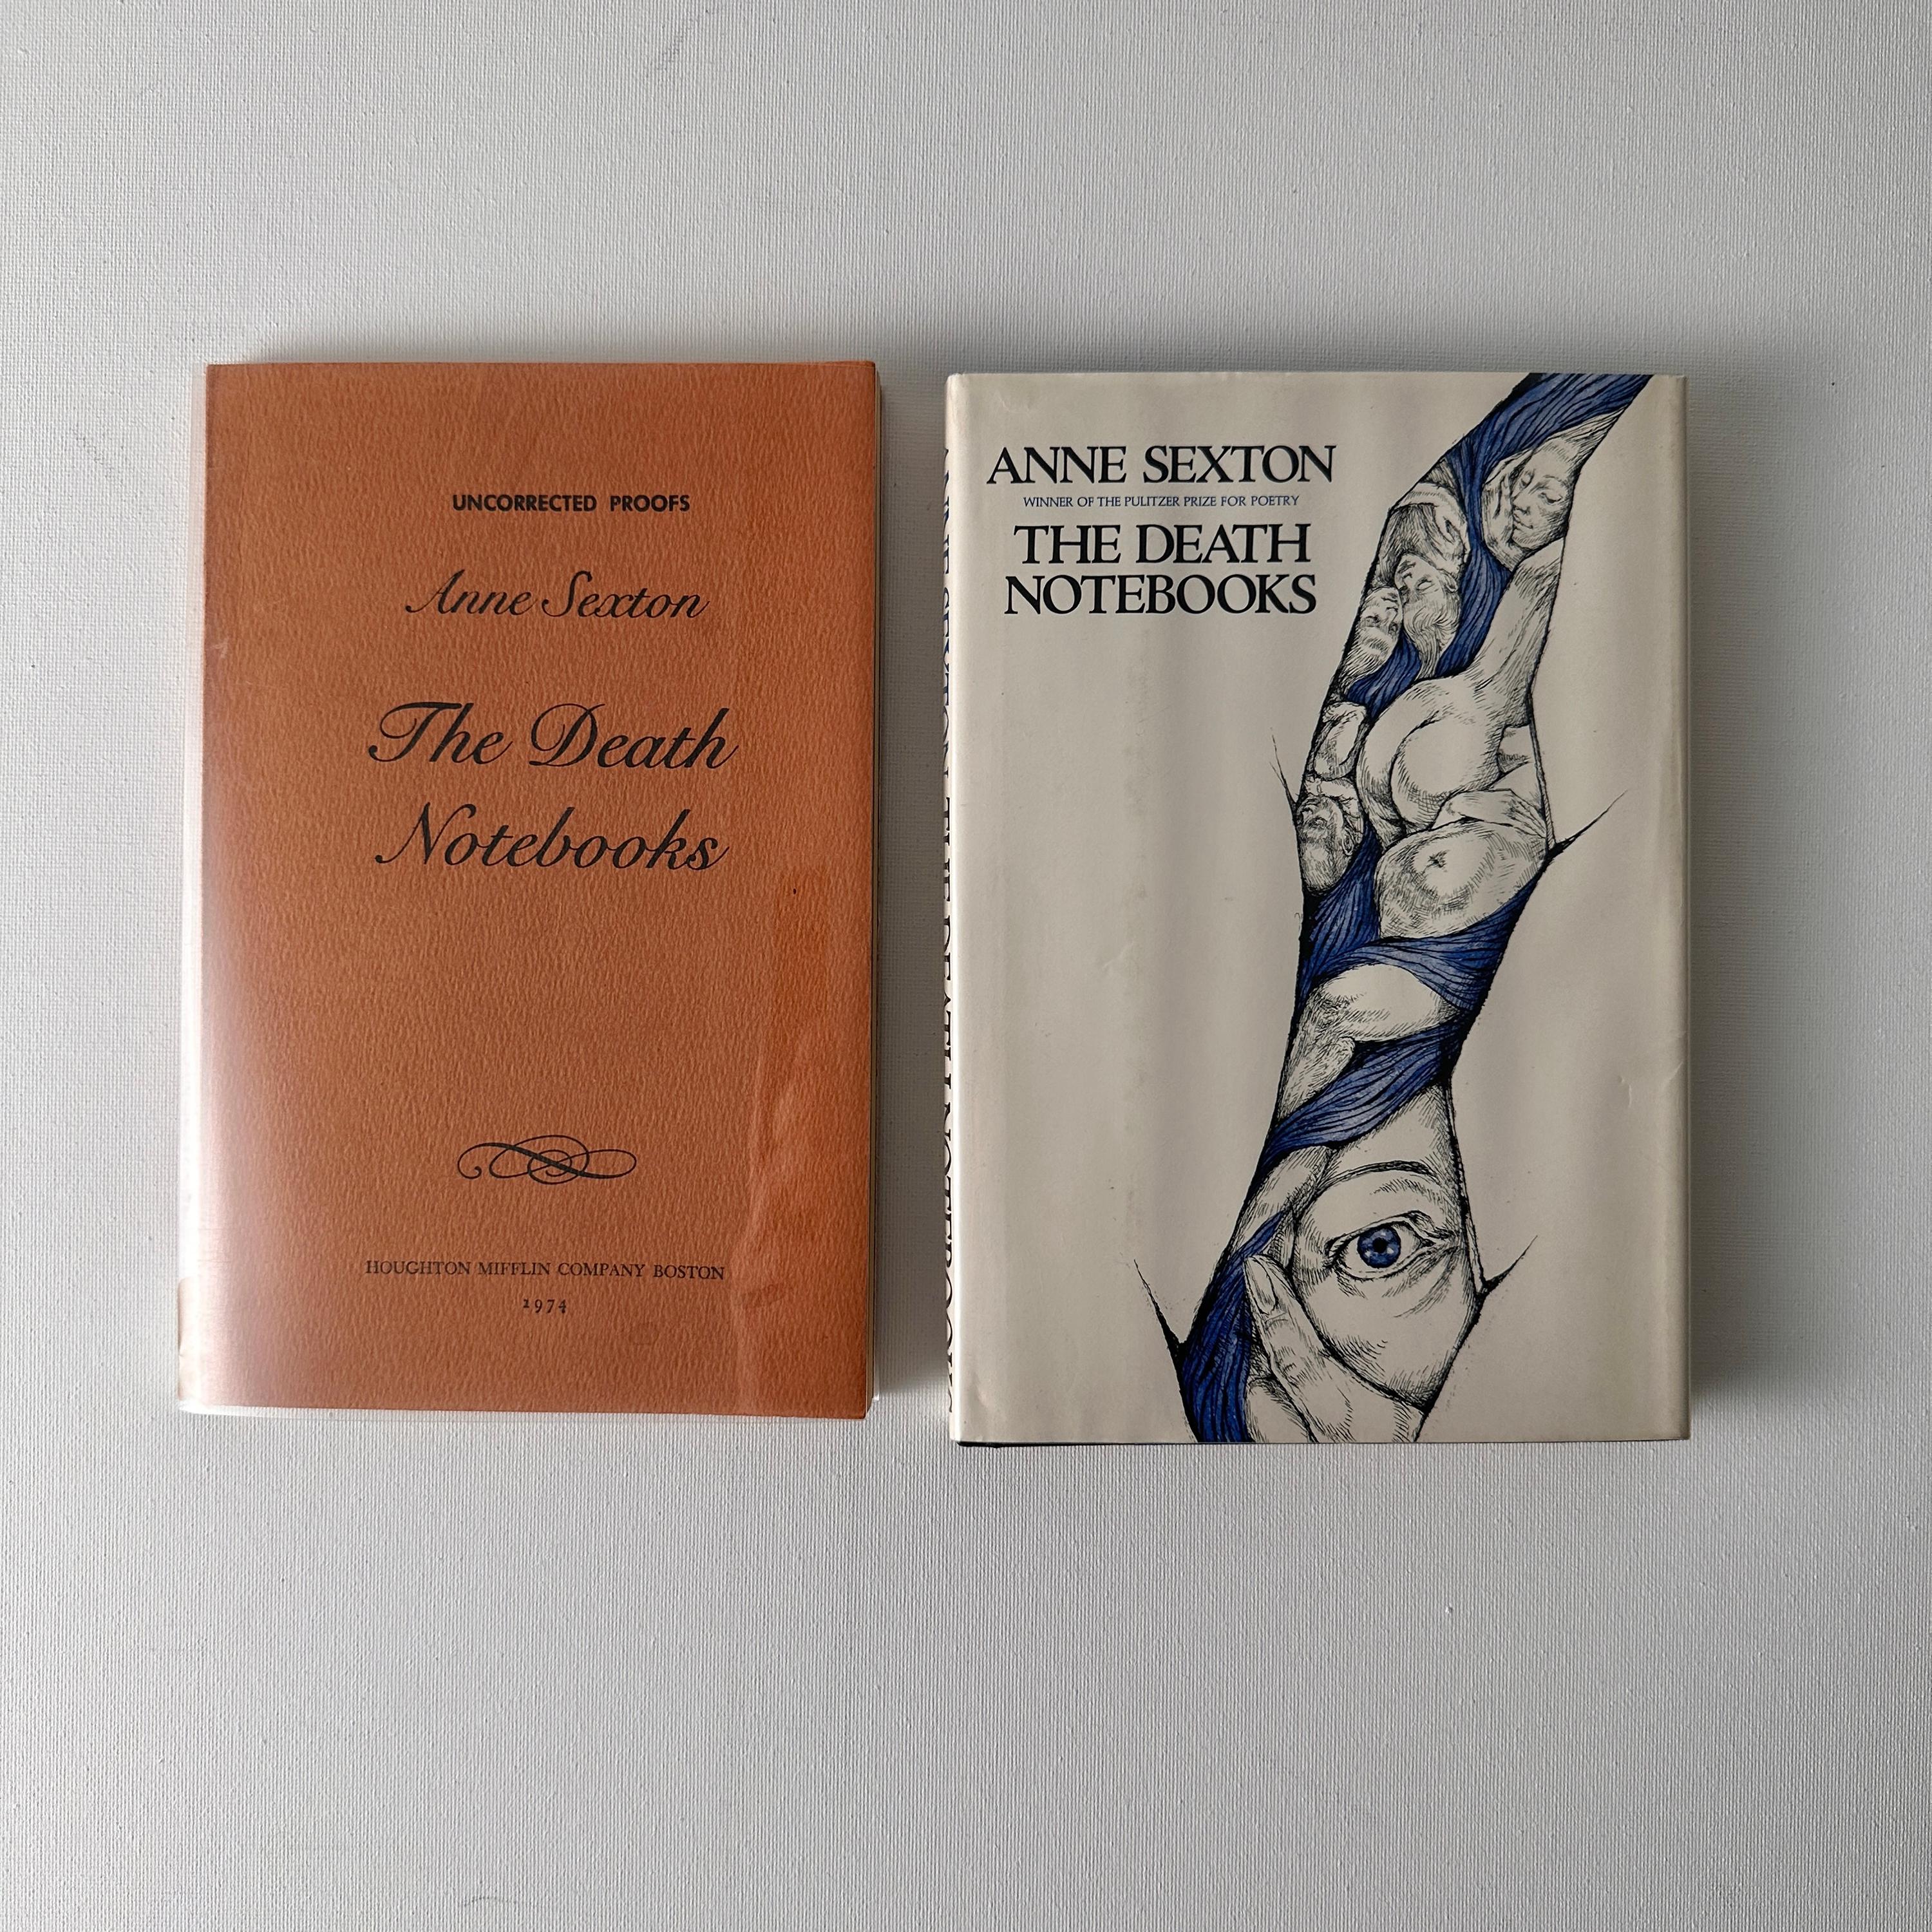 The proof (printed before the hardcover, sent out to reviewers) and final first printing, first edition of American poet, Anne Sexton's final collection of poetry printed in her lifetime. 

Inscribed, 